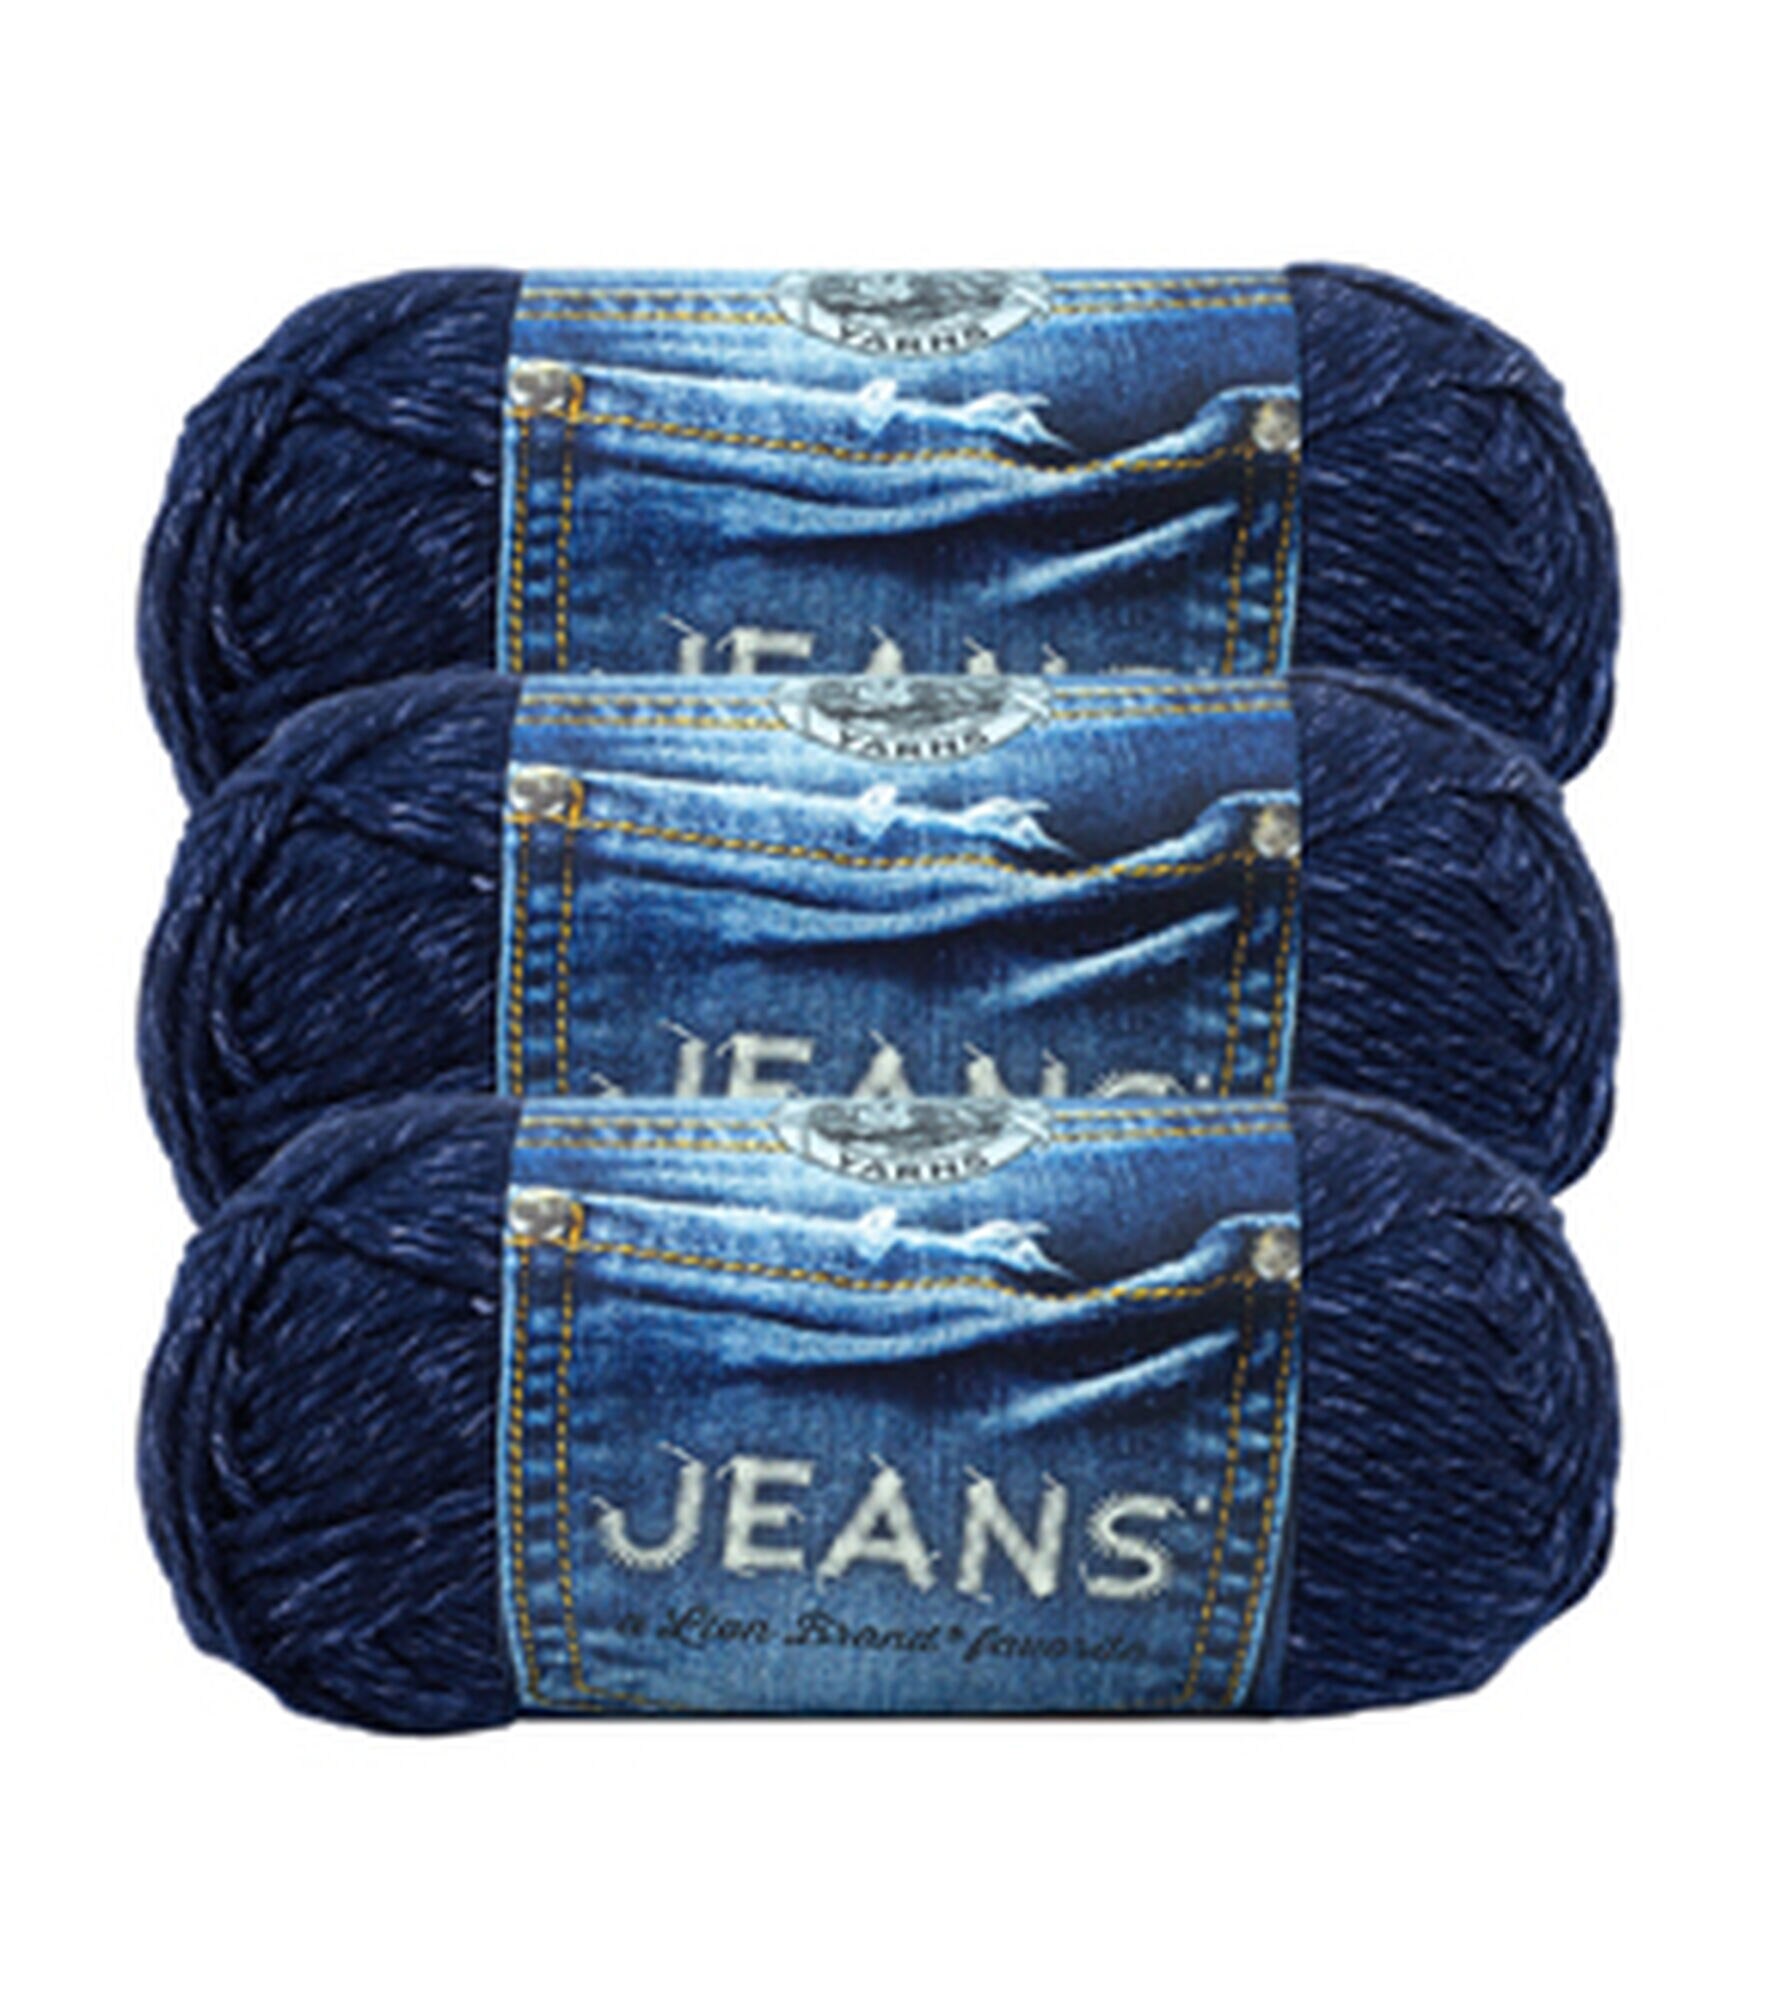 Lion Brand Jeans Worsted Acrylic Yarn 3 Bundle, Brand New, hi-res